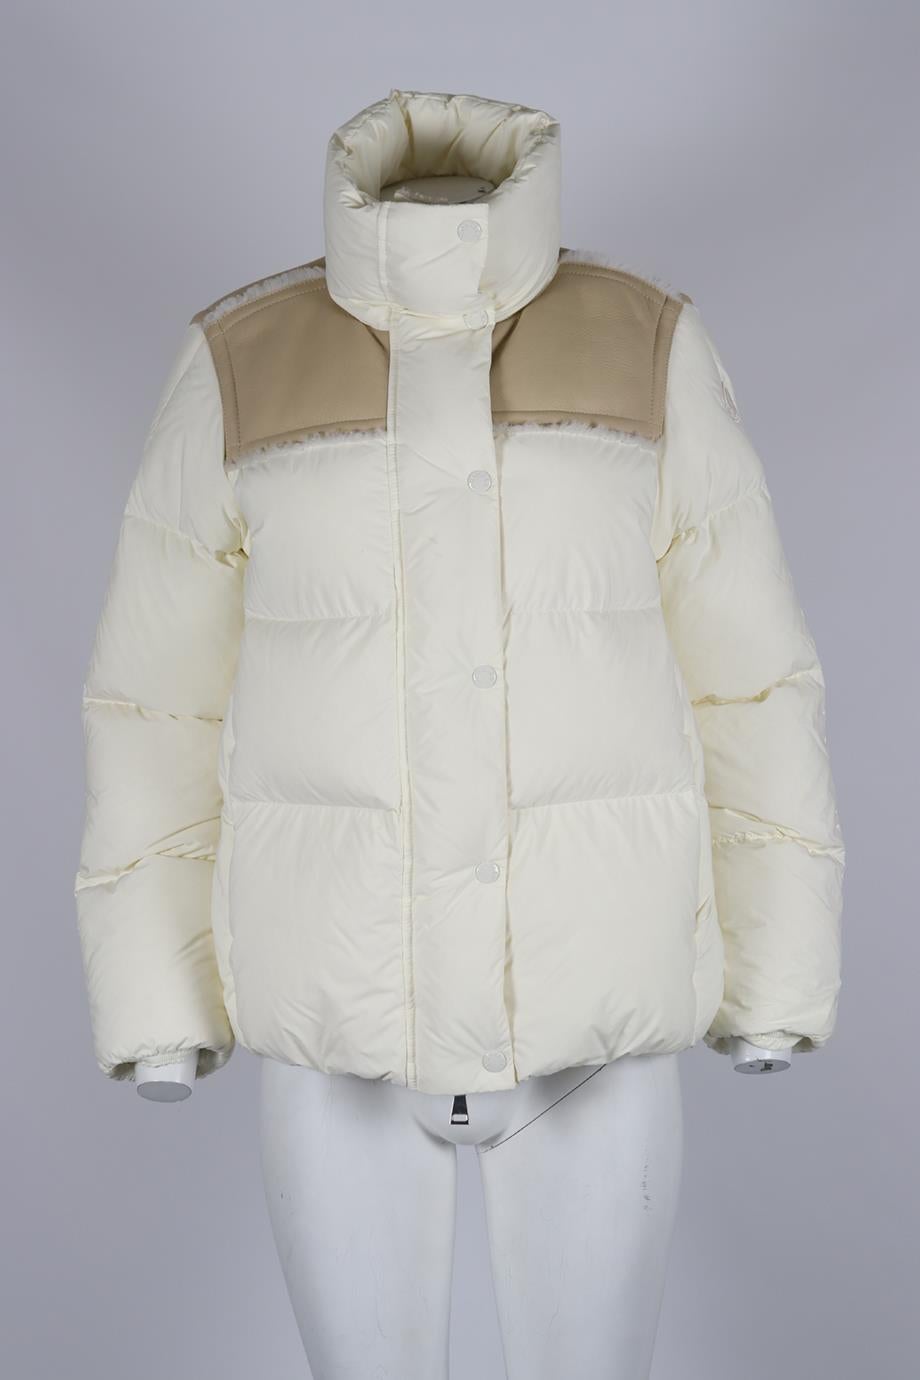 Moncler Shearling Trimmed Quilted Shell Down Jacket. Cream and beige. Long Sleeve. Turtleneck. Button and zip fastening - Front. 90% Down, 10% feathers; lining: 70% polyamide, 30% polyester; material: 70% polyamide, 30% polyester. 1 (UK 8, US 4, FR